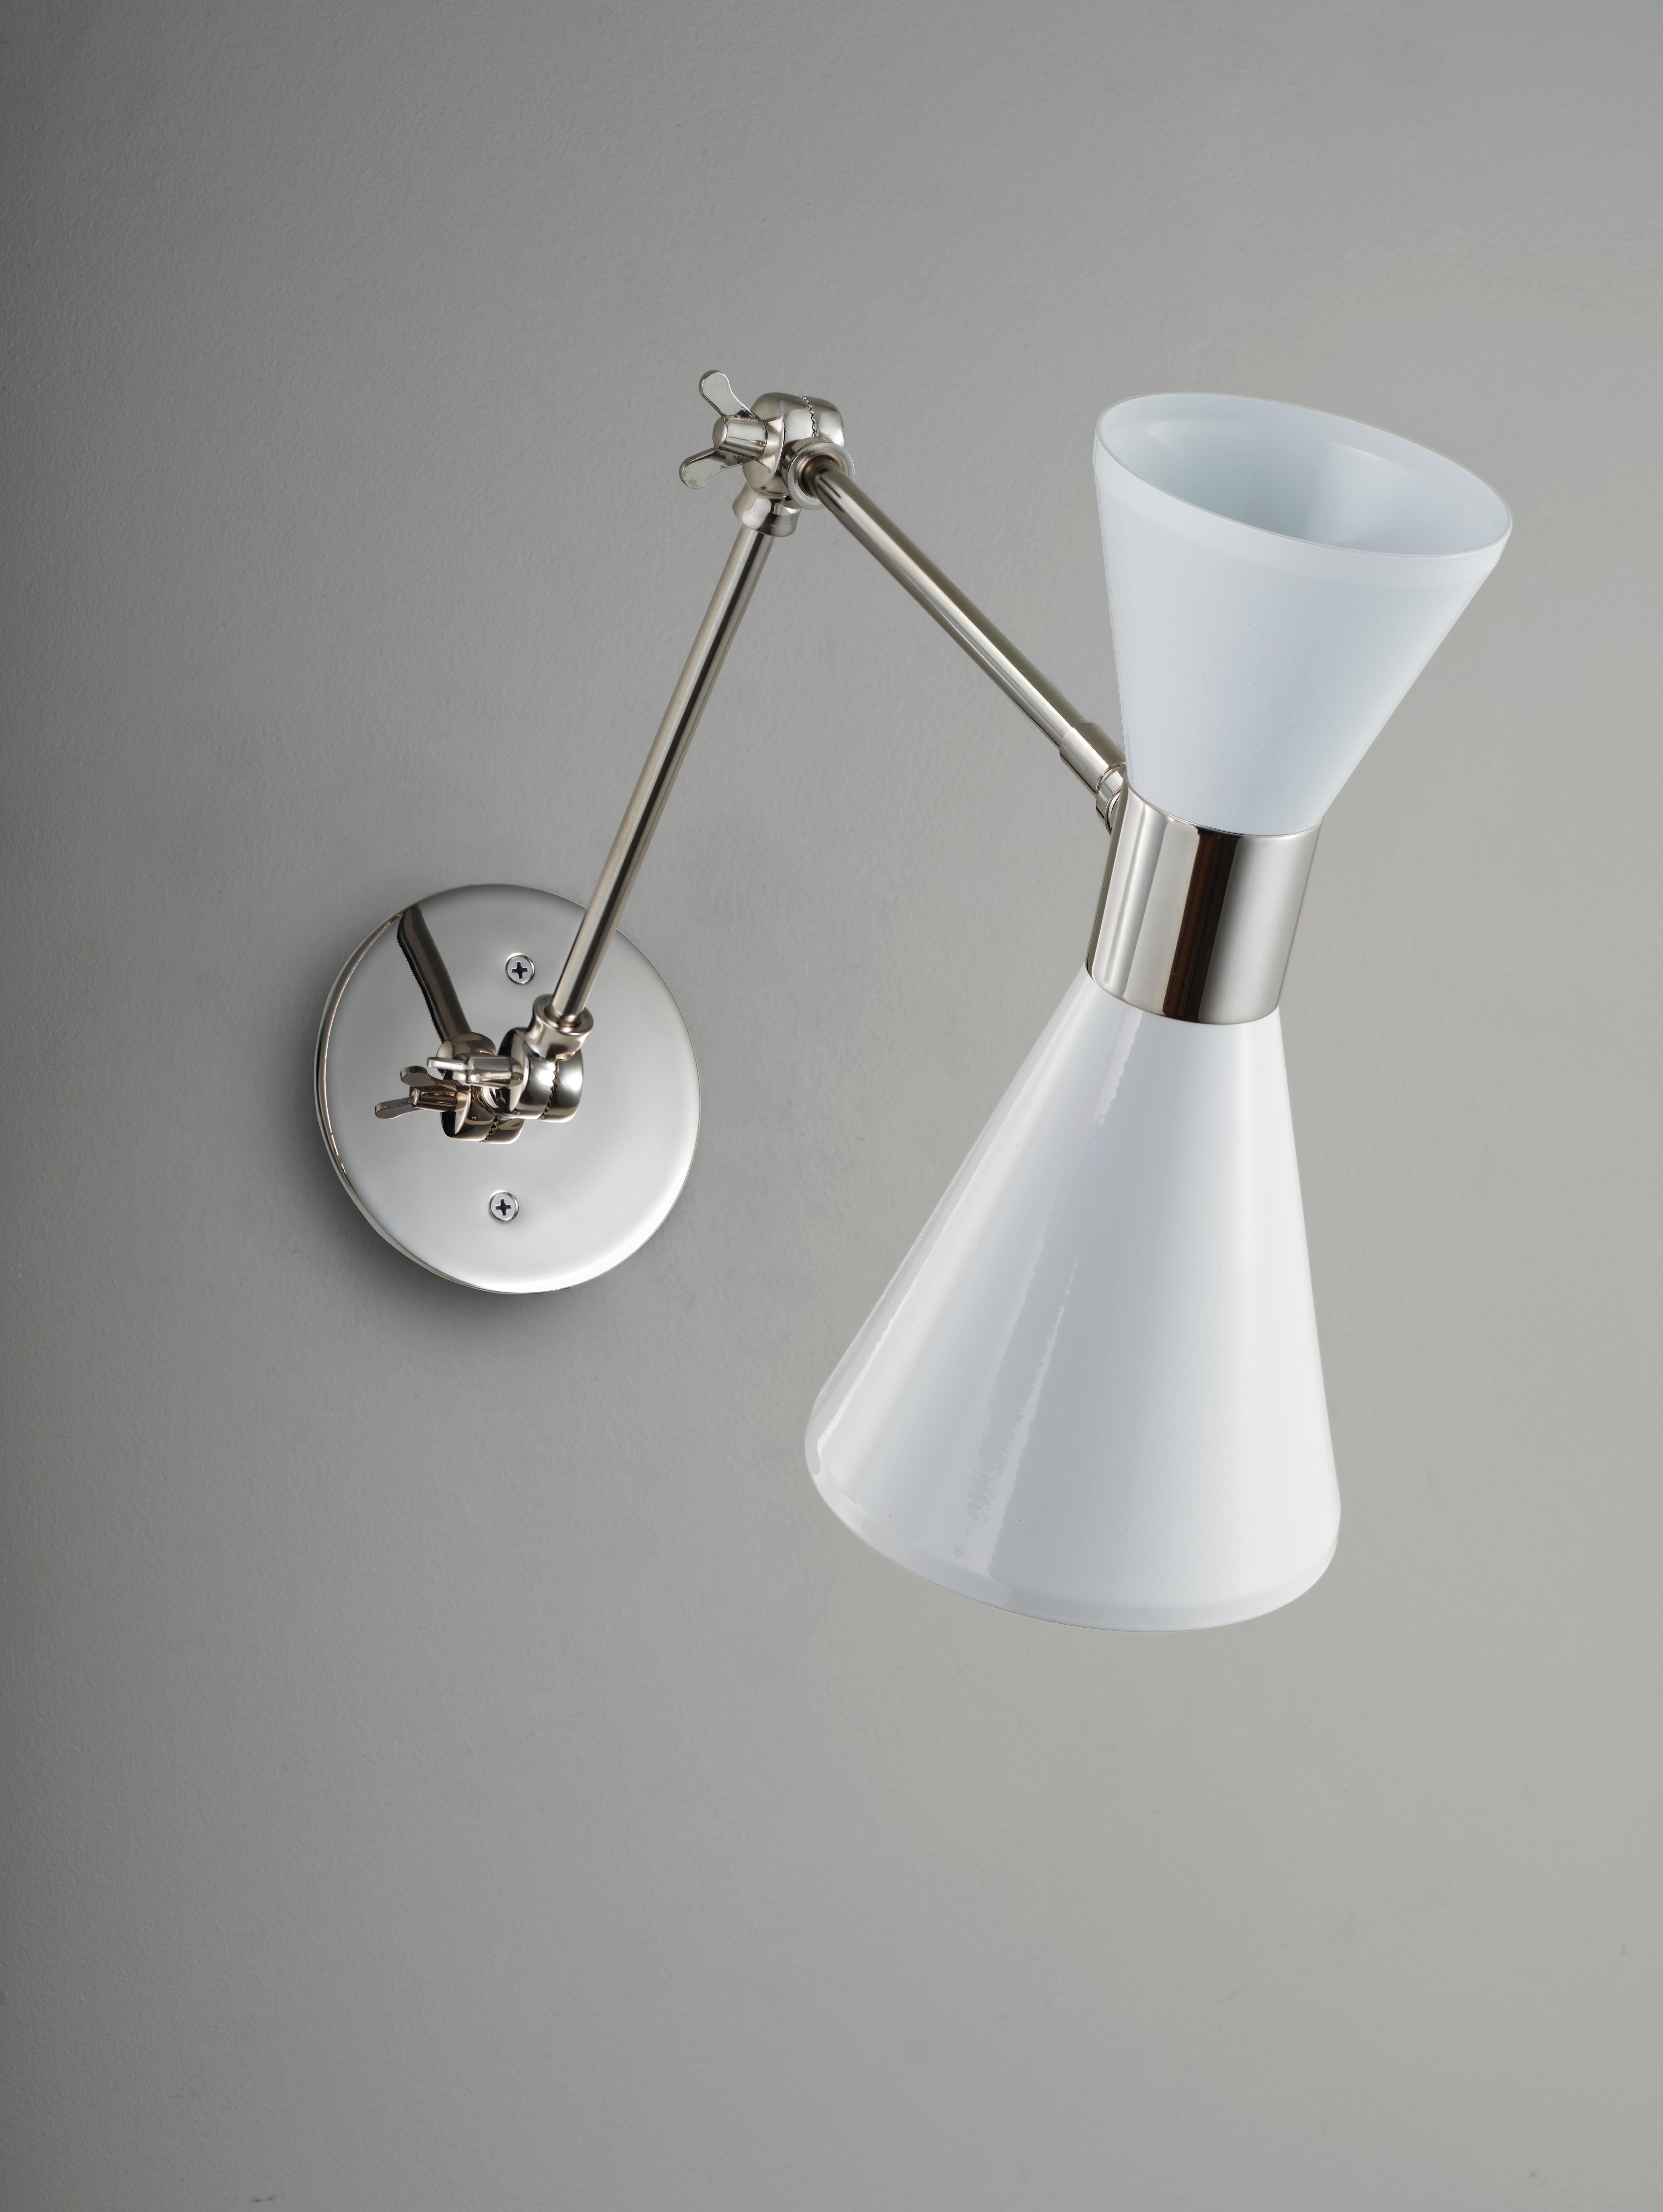 CAMPANA Articulating Wall Lamp in White and Polished Nickel, Blueprint Lighting In New Condition For Sale In New York, NY